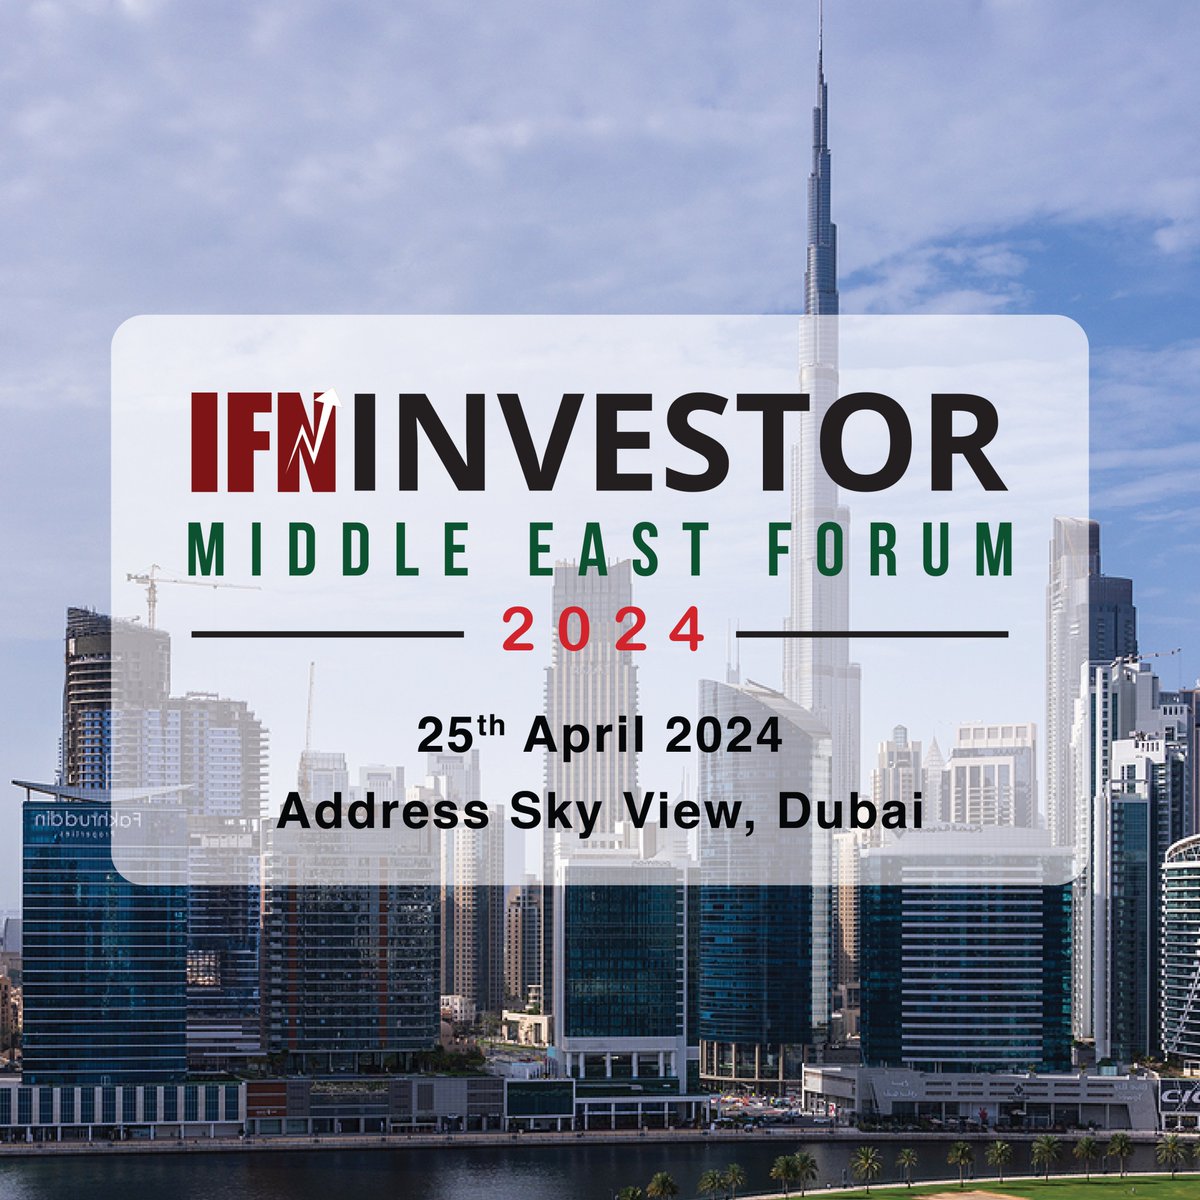 Don't miss the expert roundtable on technology integrations shaping Islamic asset management at IFN Investor Middle East Forum. A must-attend session for industry professionals. redmoneyevents.com/event/ifninves… #IFNInvestor #MiddleEastForum #REDmoney #IFN #IslamicFinance #Finance #Dubai